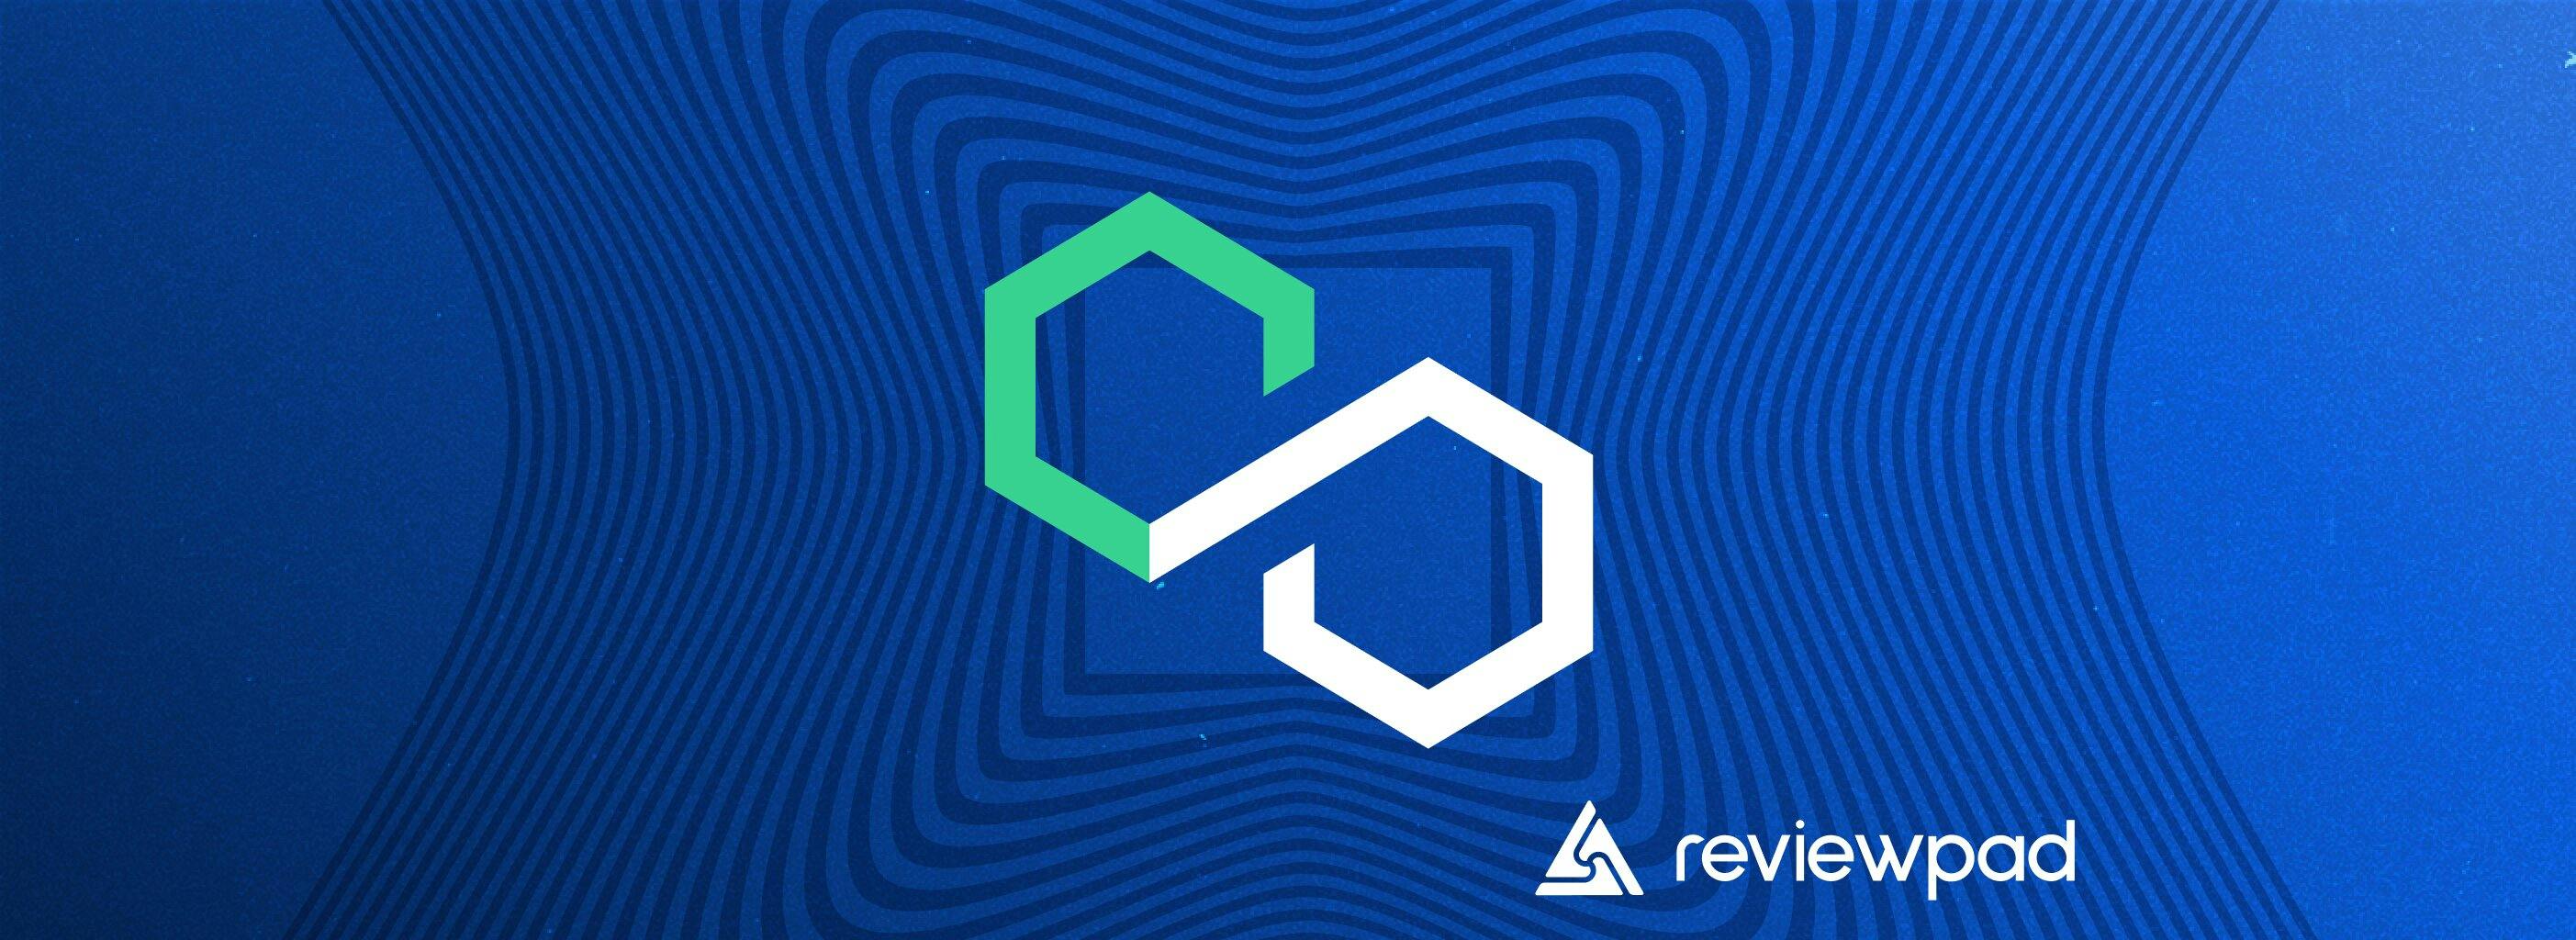 Automate pull requests in 1 minute with Reviewpad